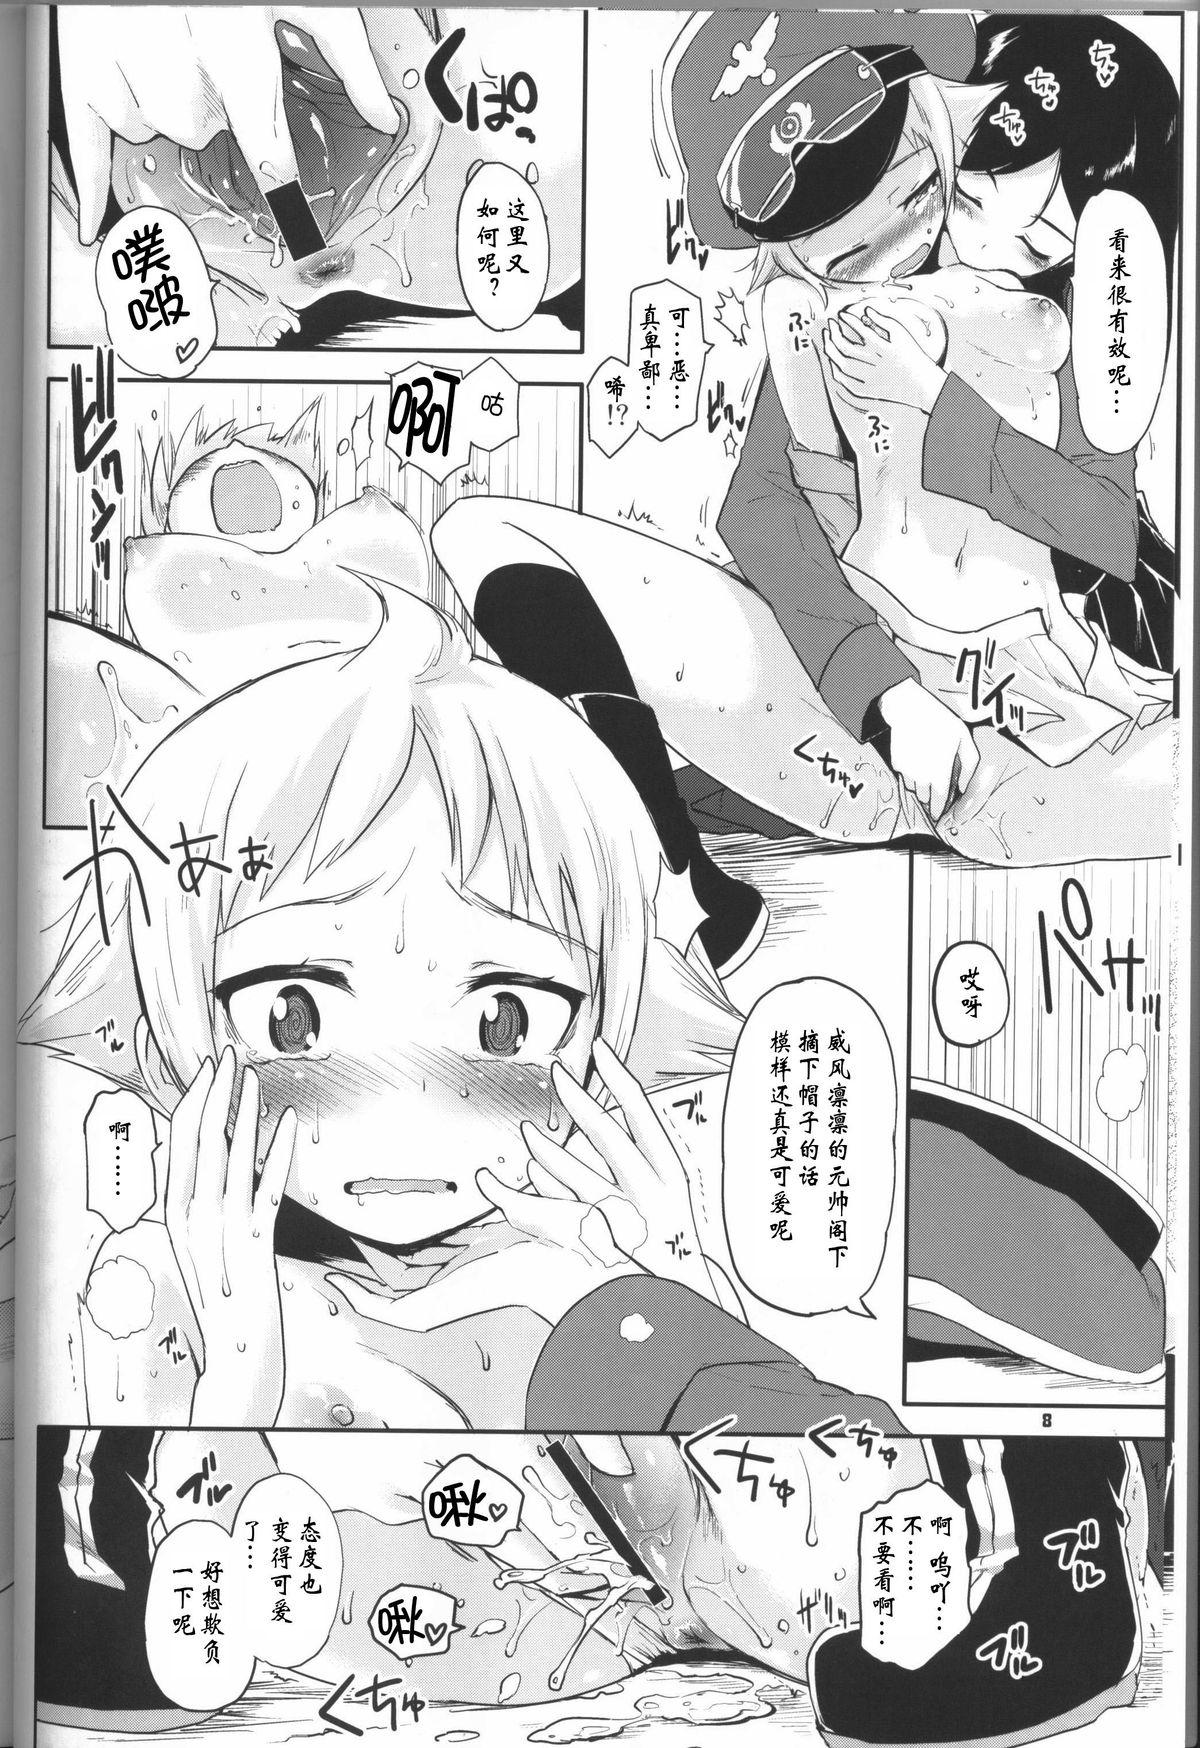 Blackwoman The General Frost Has Come! - Girls und panzer Retro - Page 7